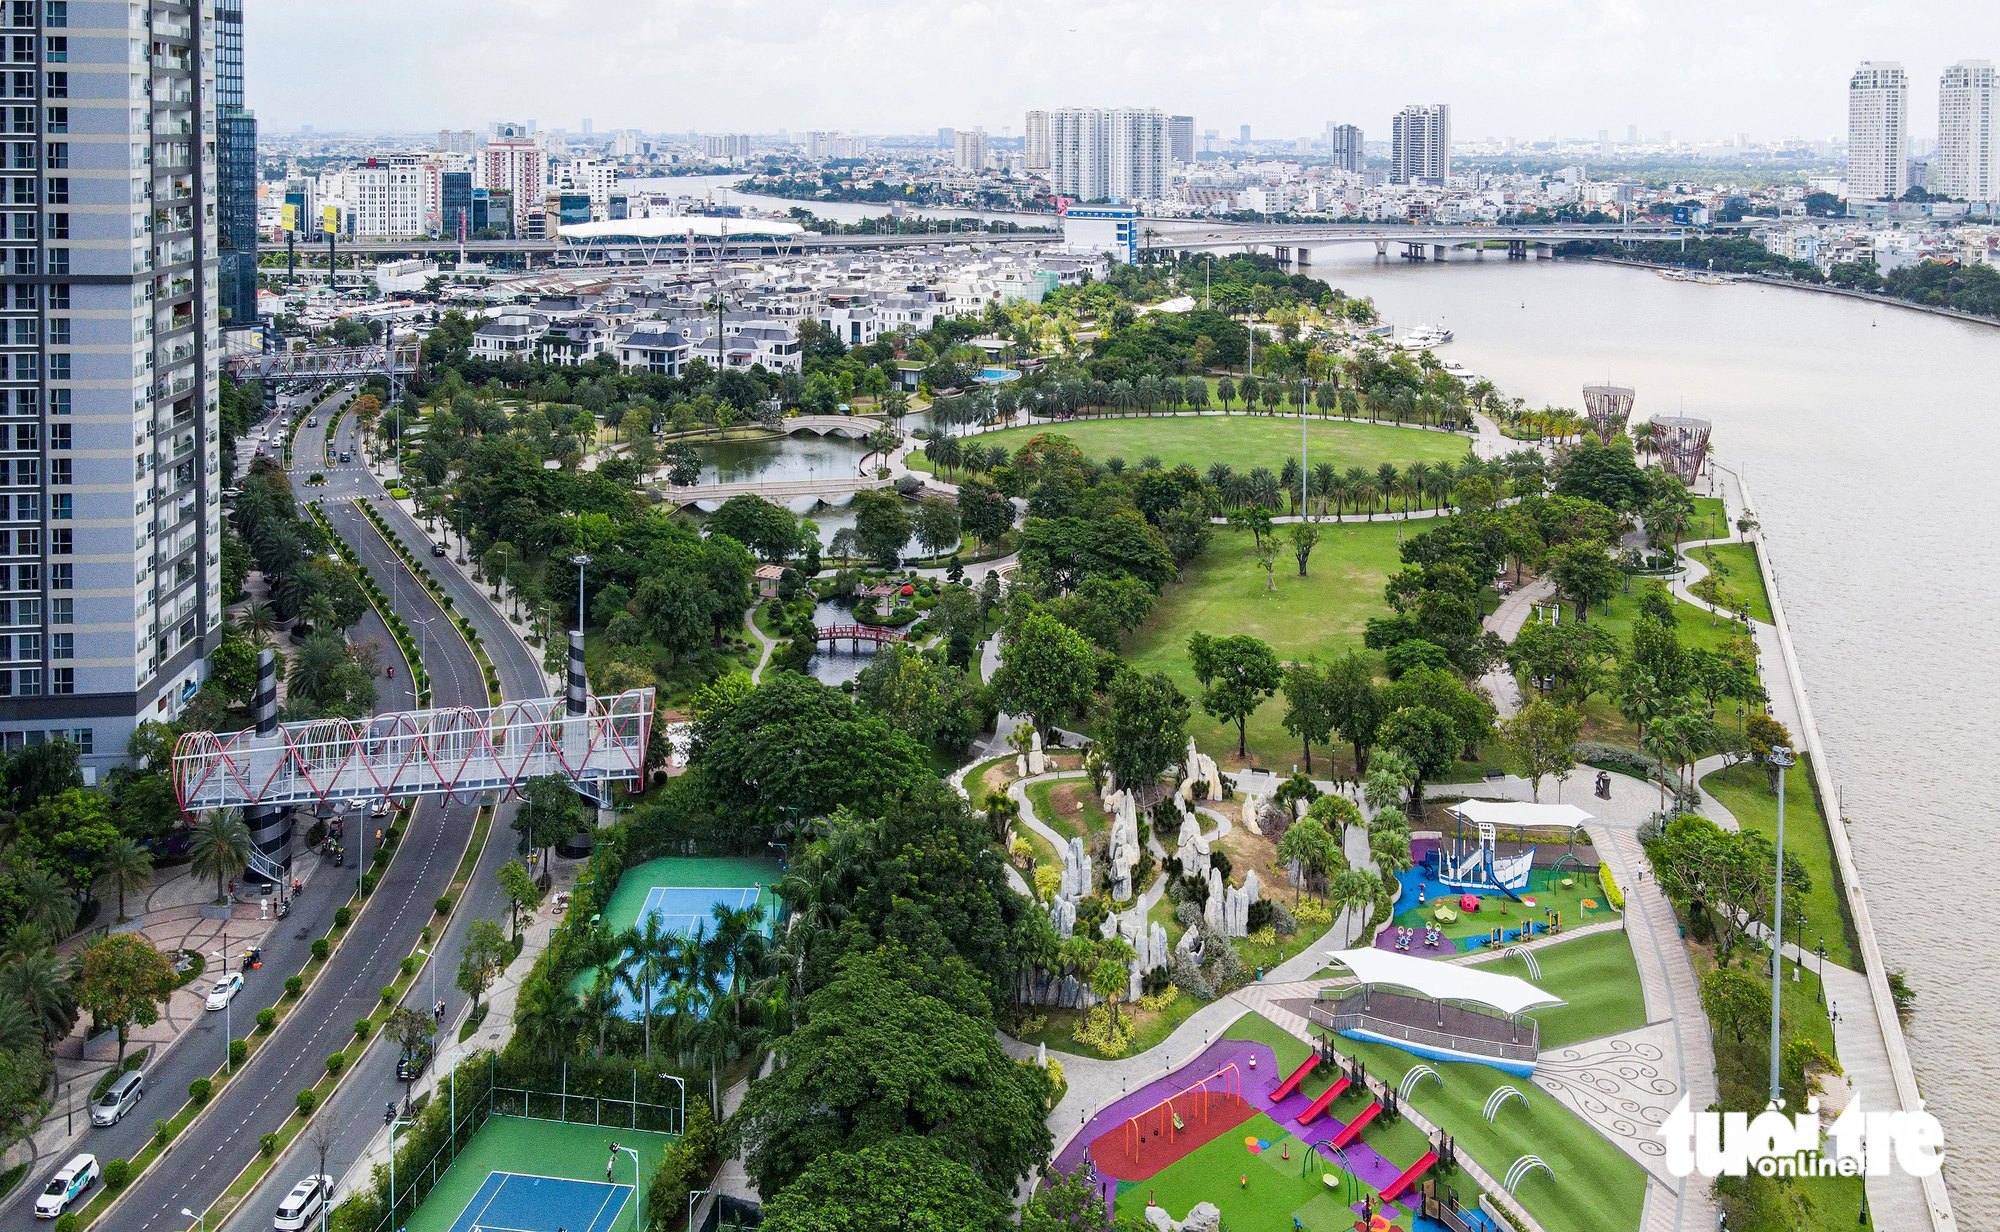 The 1km-long riverside section at the Vinhomes residential area features adequate infrastructure facilities and the large Vinhome Central Park. Given its vast and green space, the park is considered one of the most stunning parks in the city. Photo: Tuoi Tre